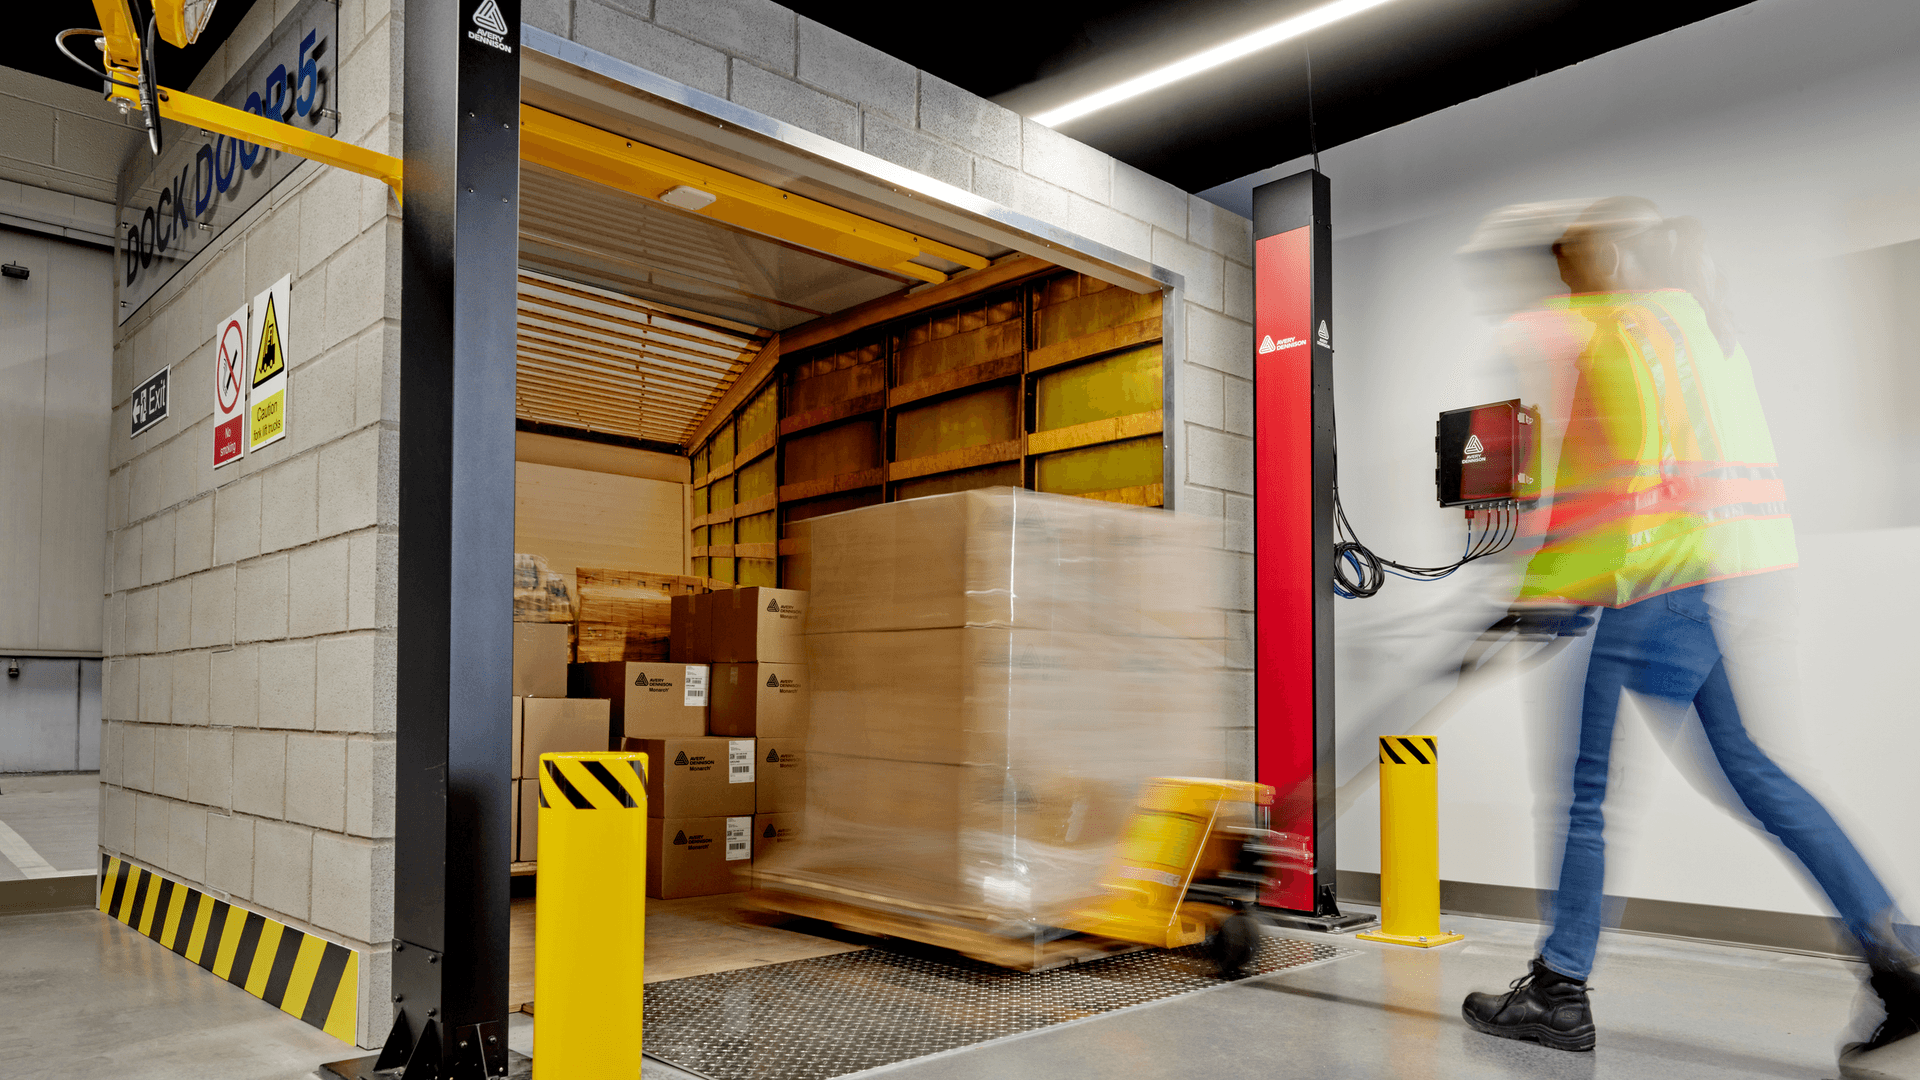 forklifts in large warehouse full of boxes